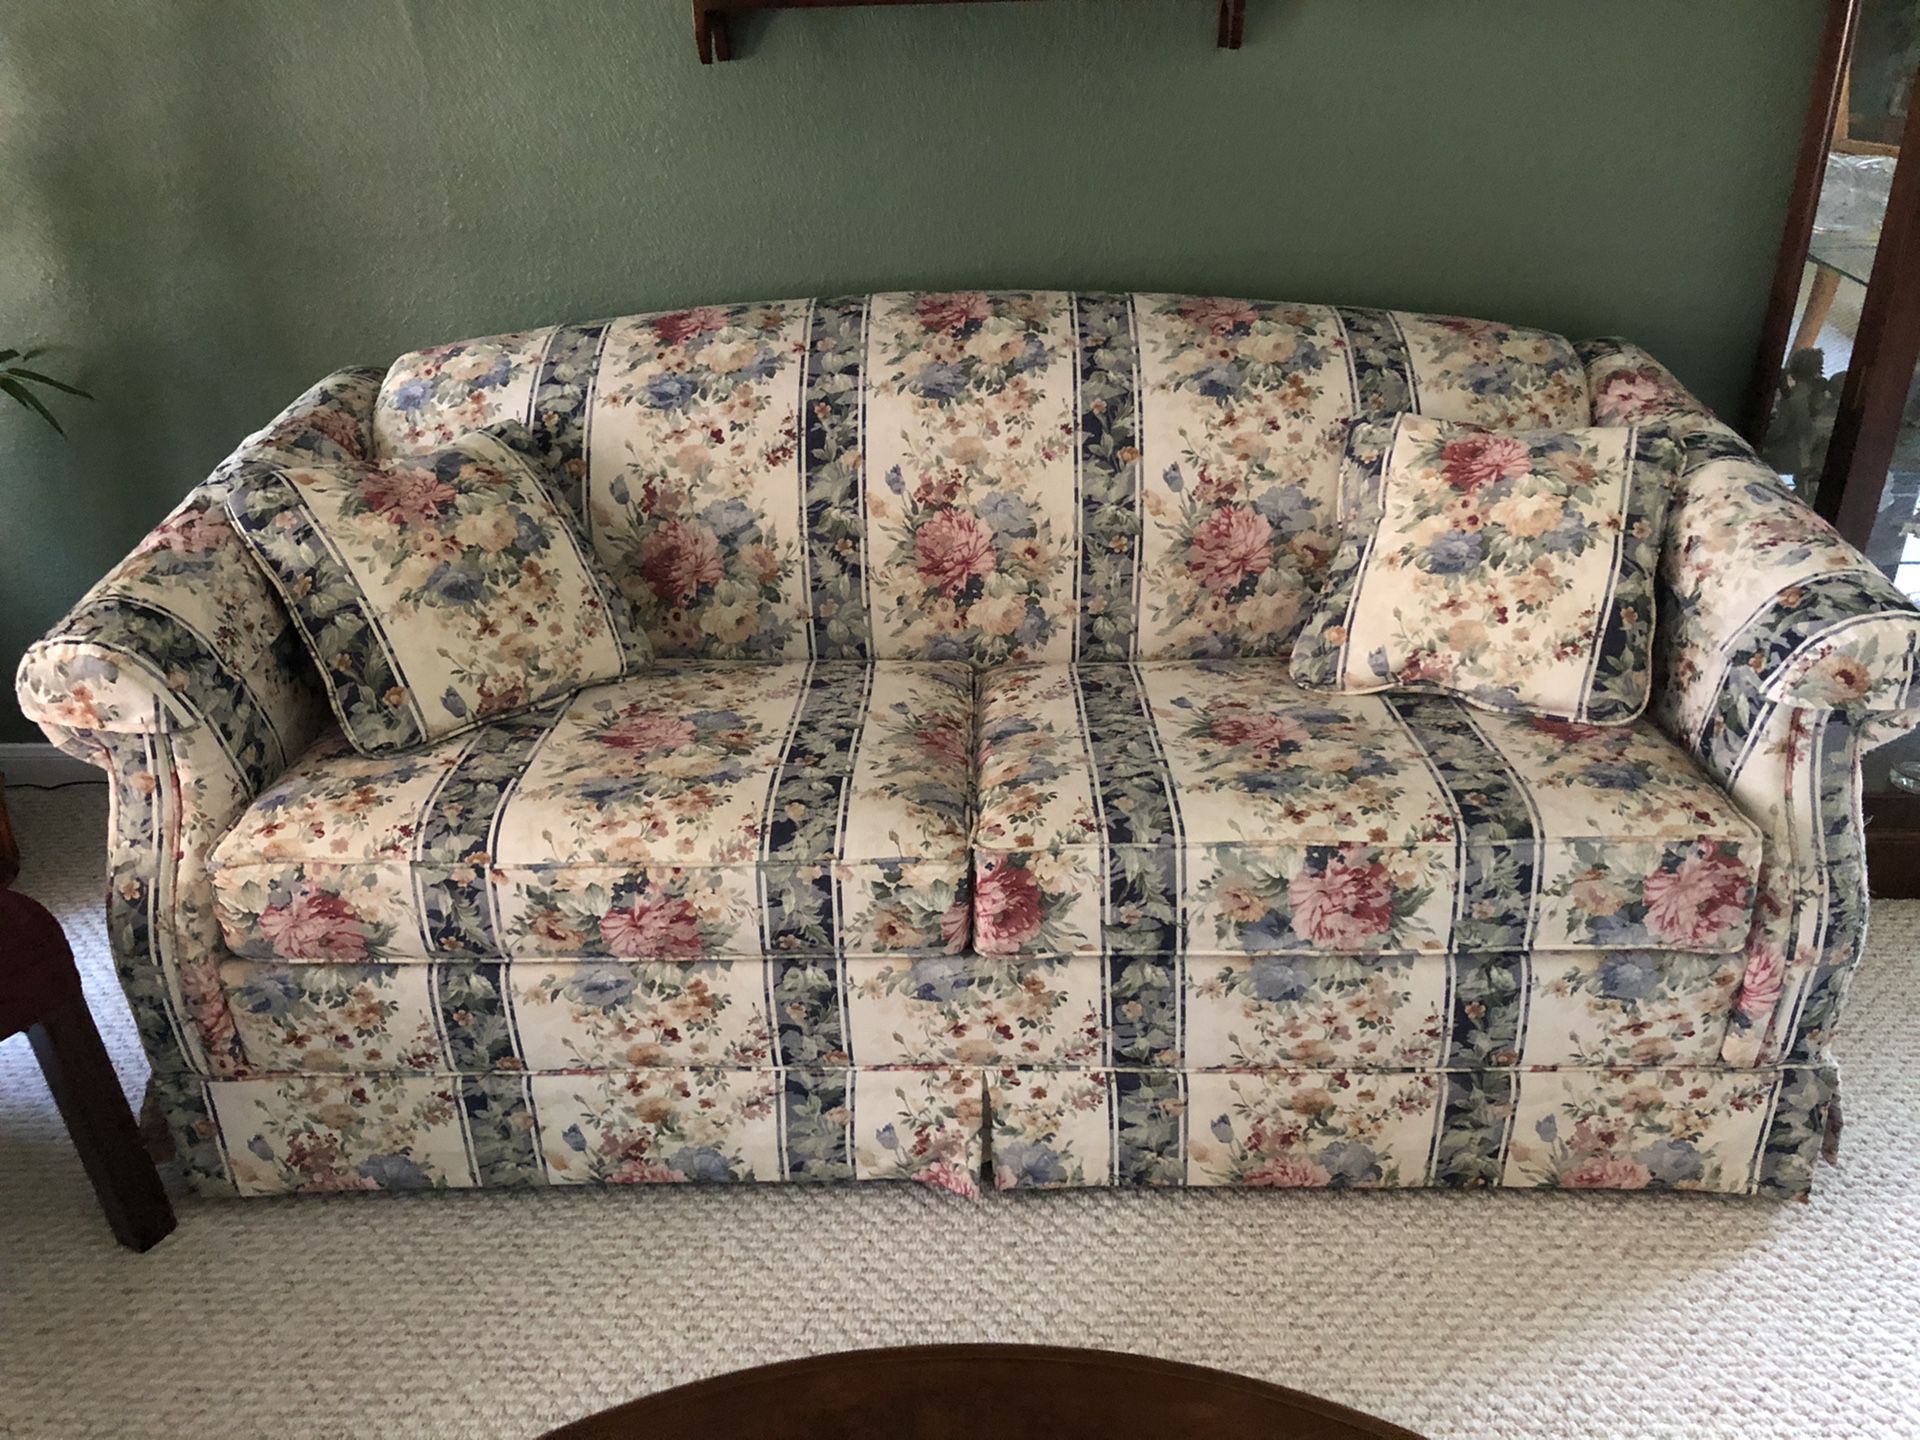 Sofa bed - Queen Size - Excellent Condition